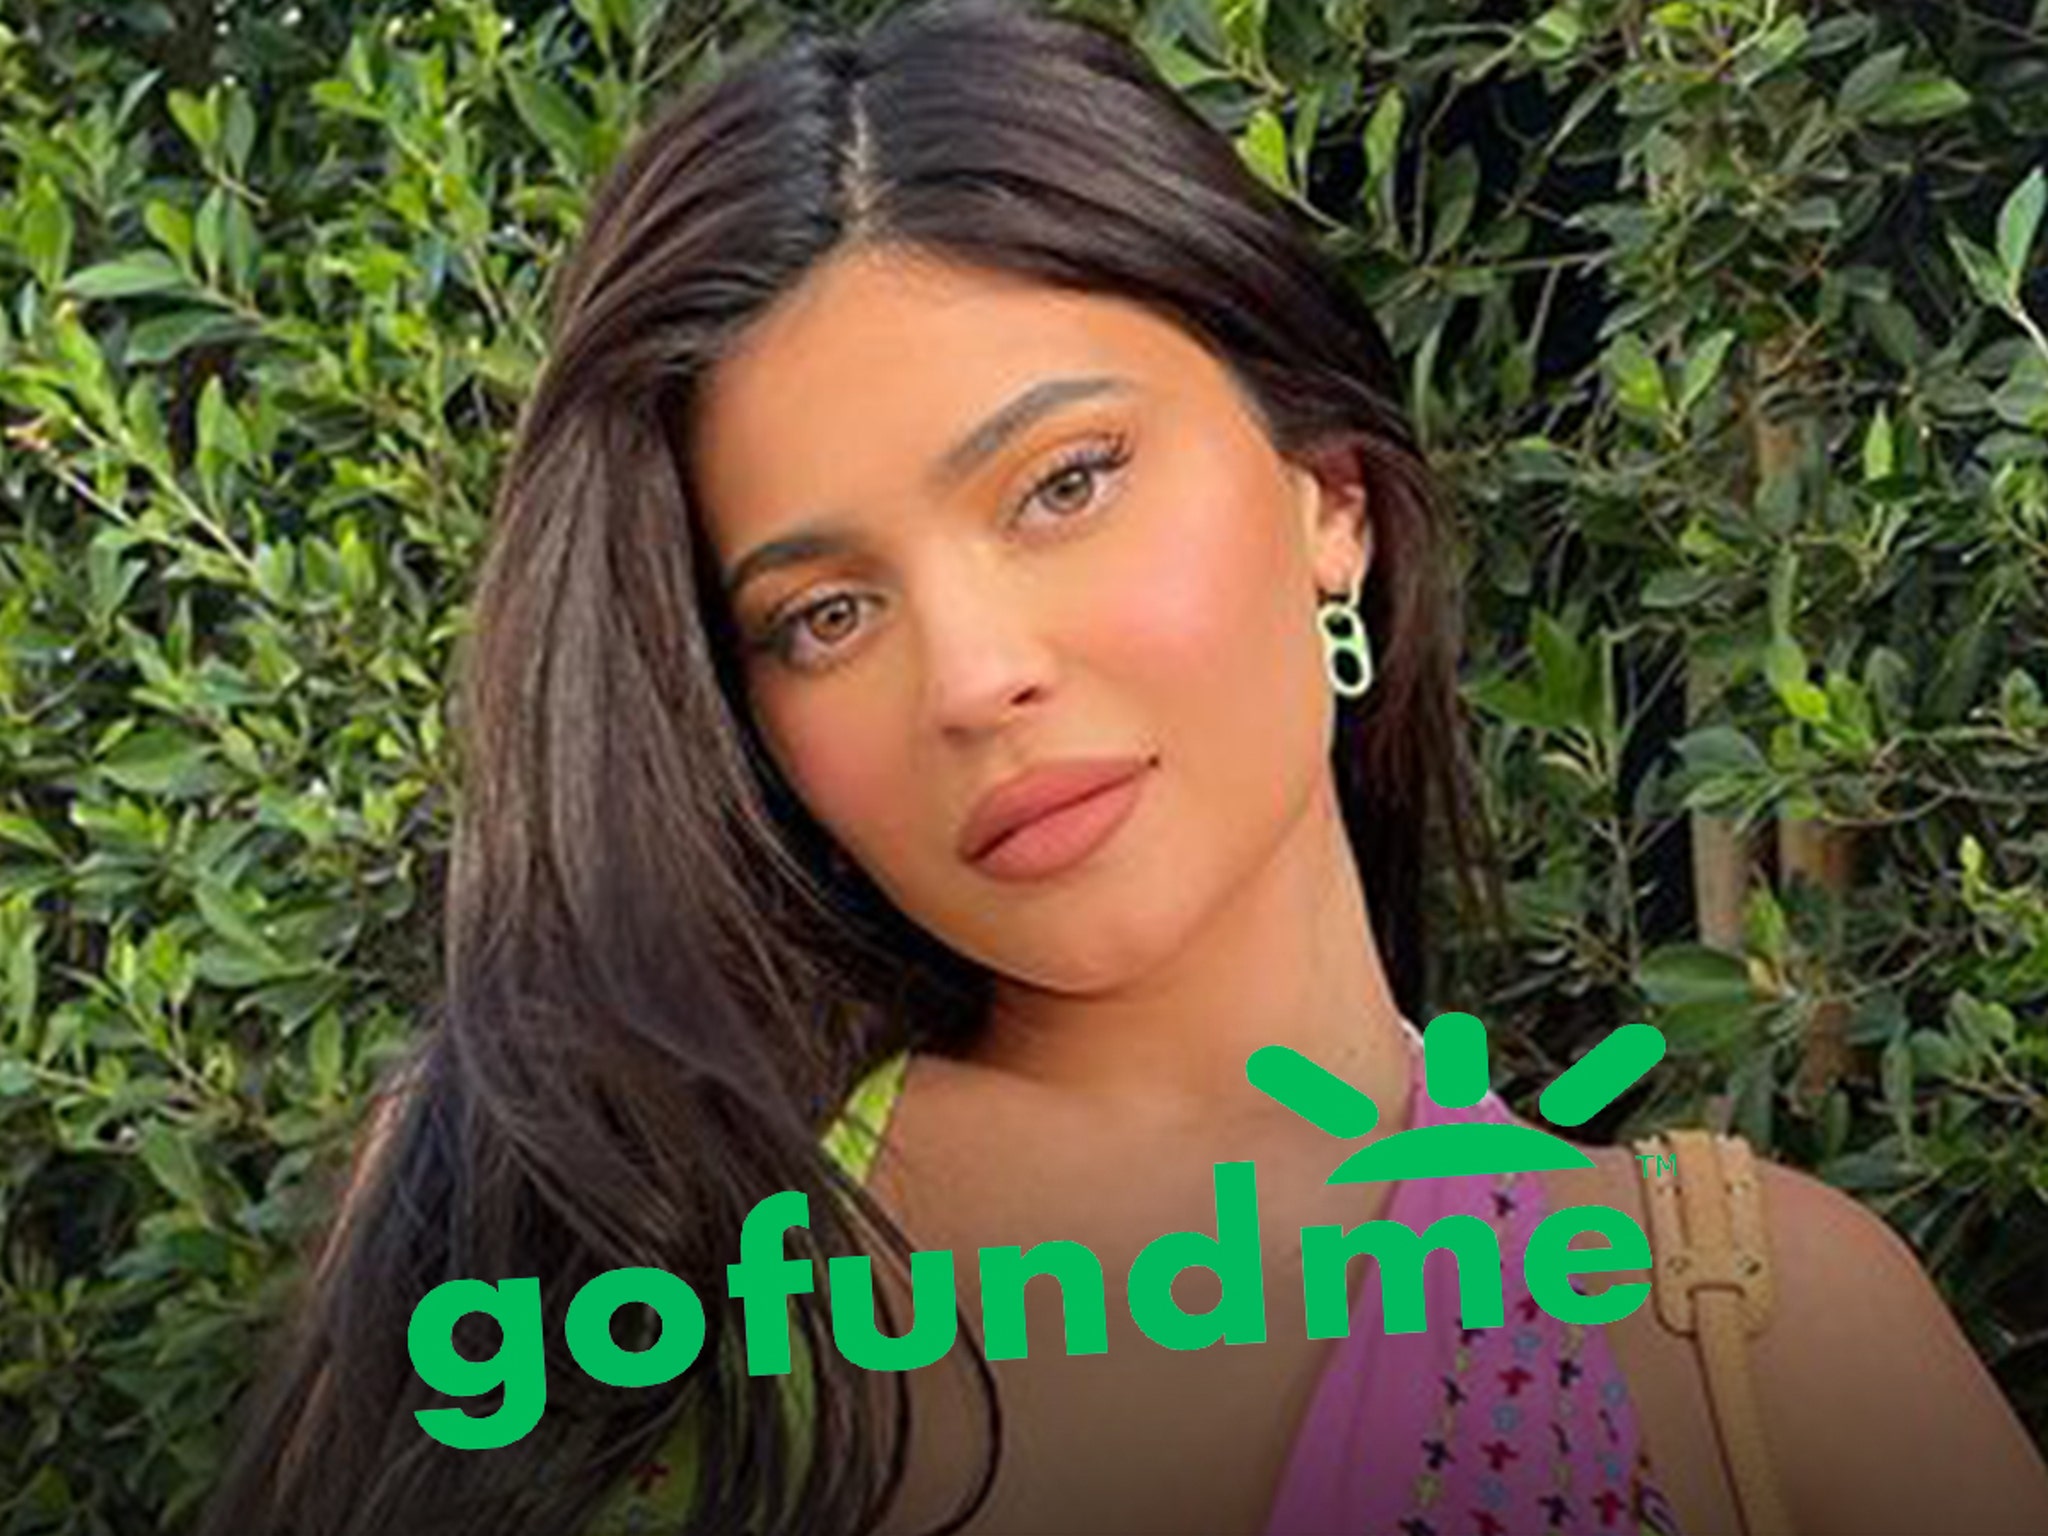 Kylie Jenner speaks out after makeup artist's GoFundMe controversy